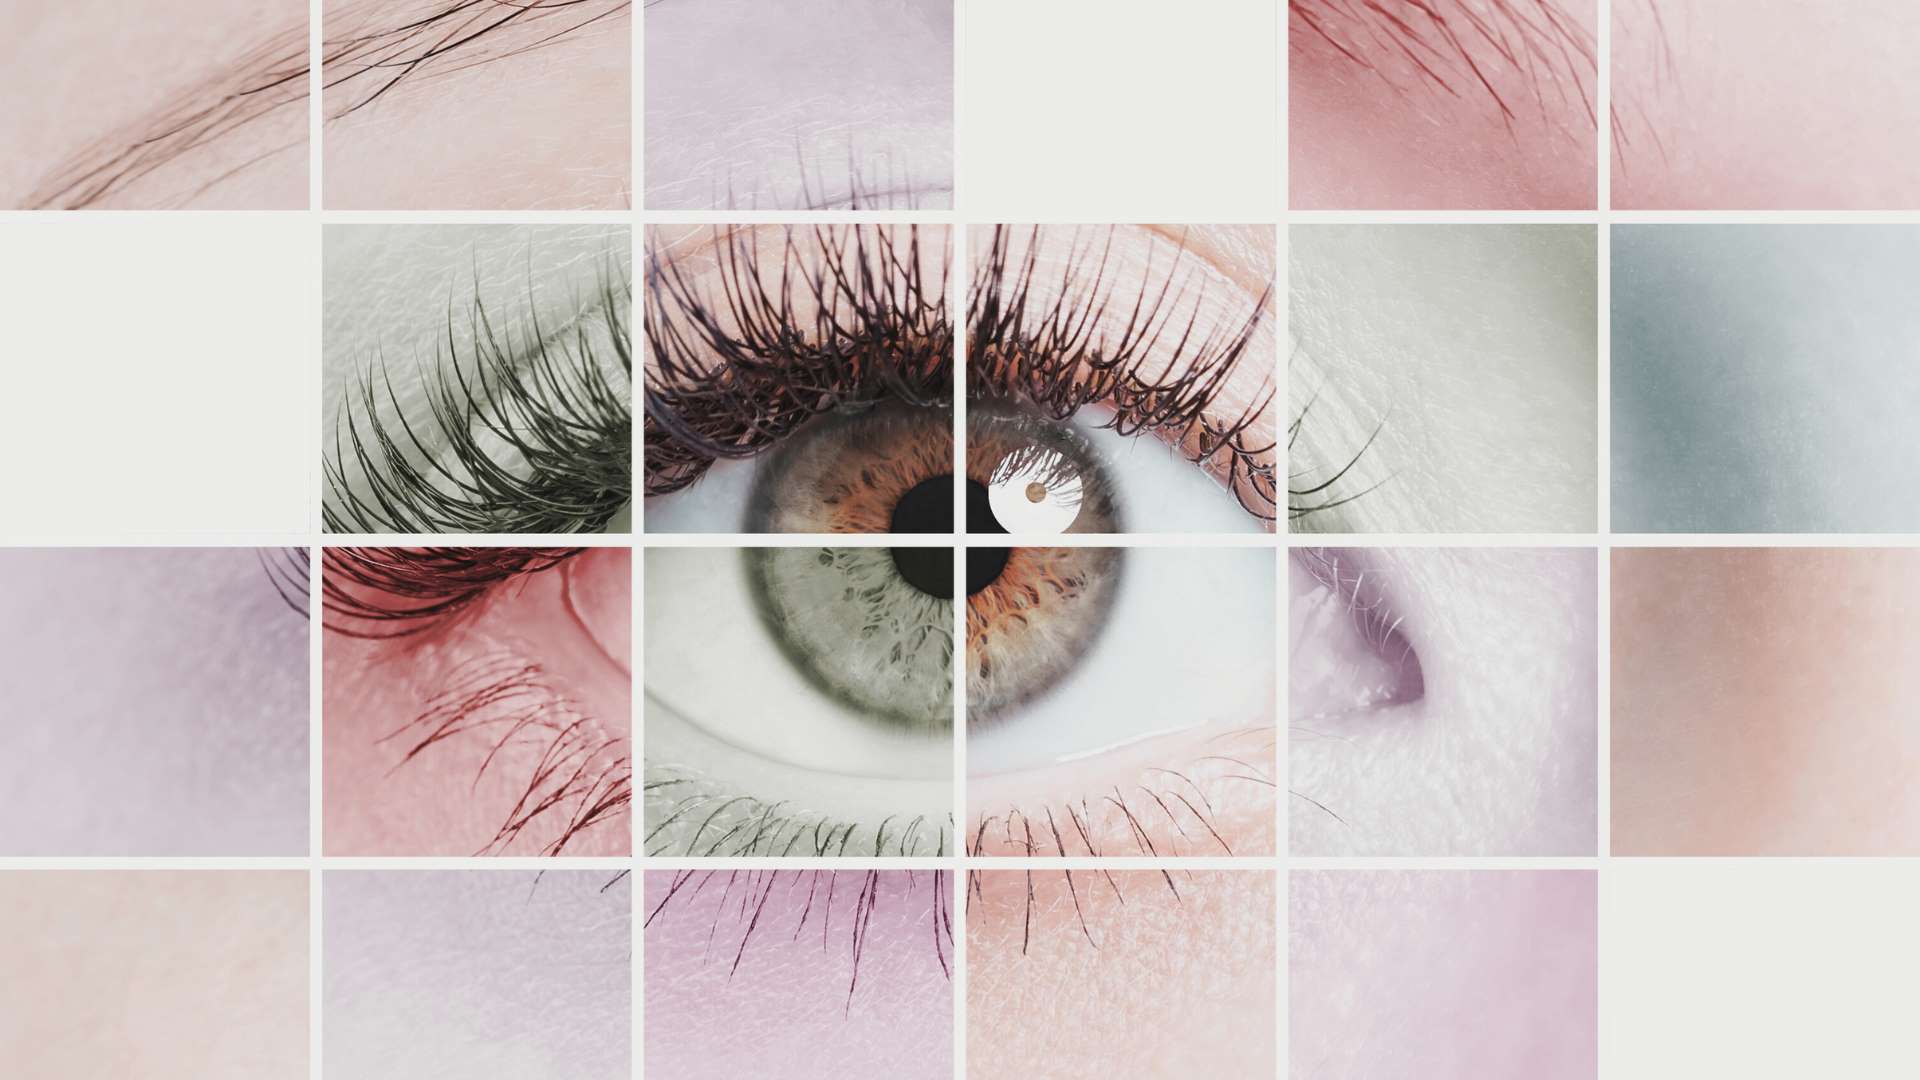 What are the most common eye diseases?